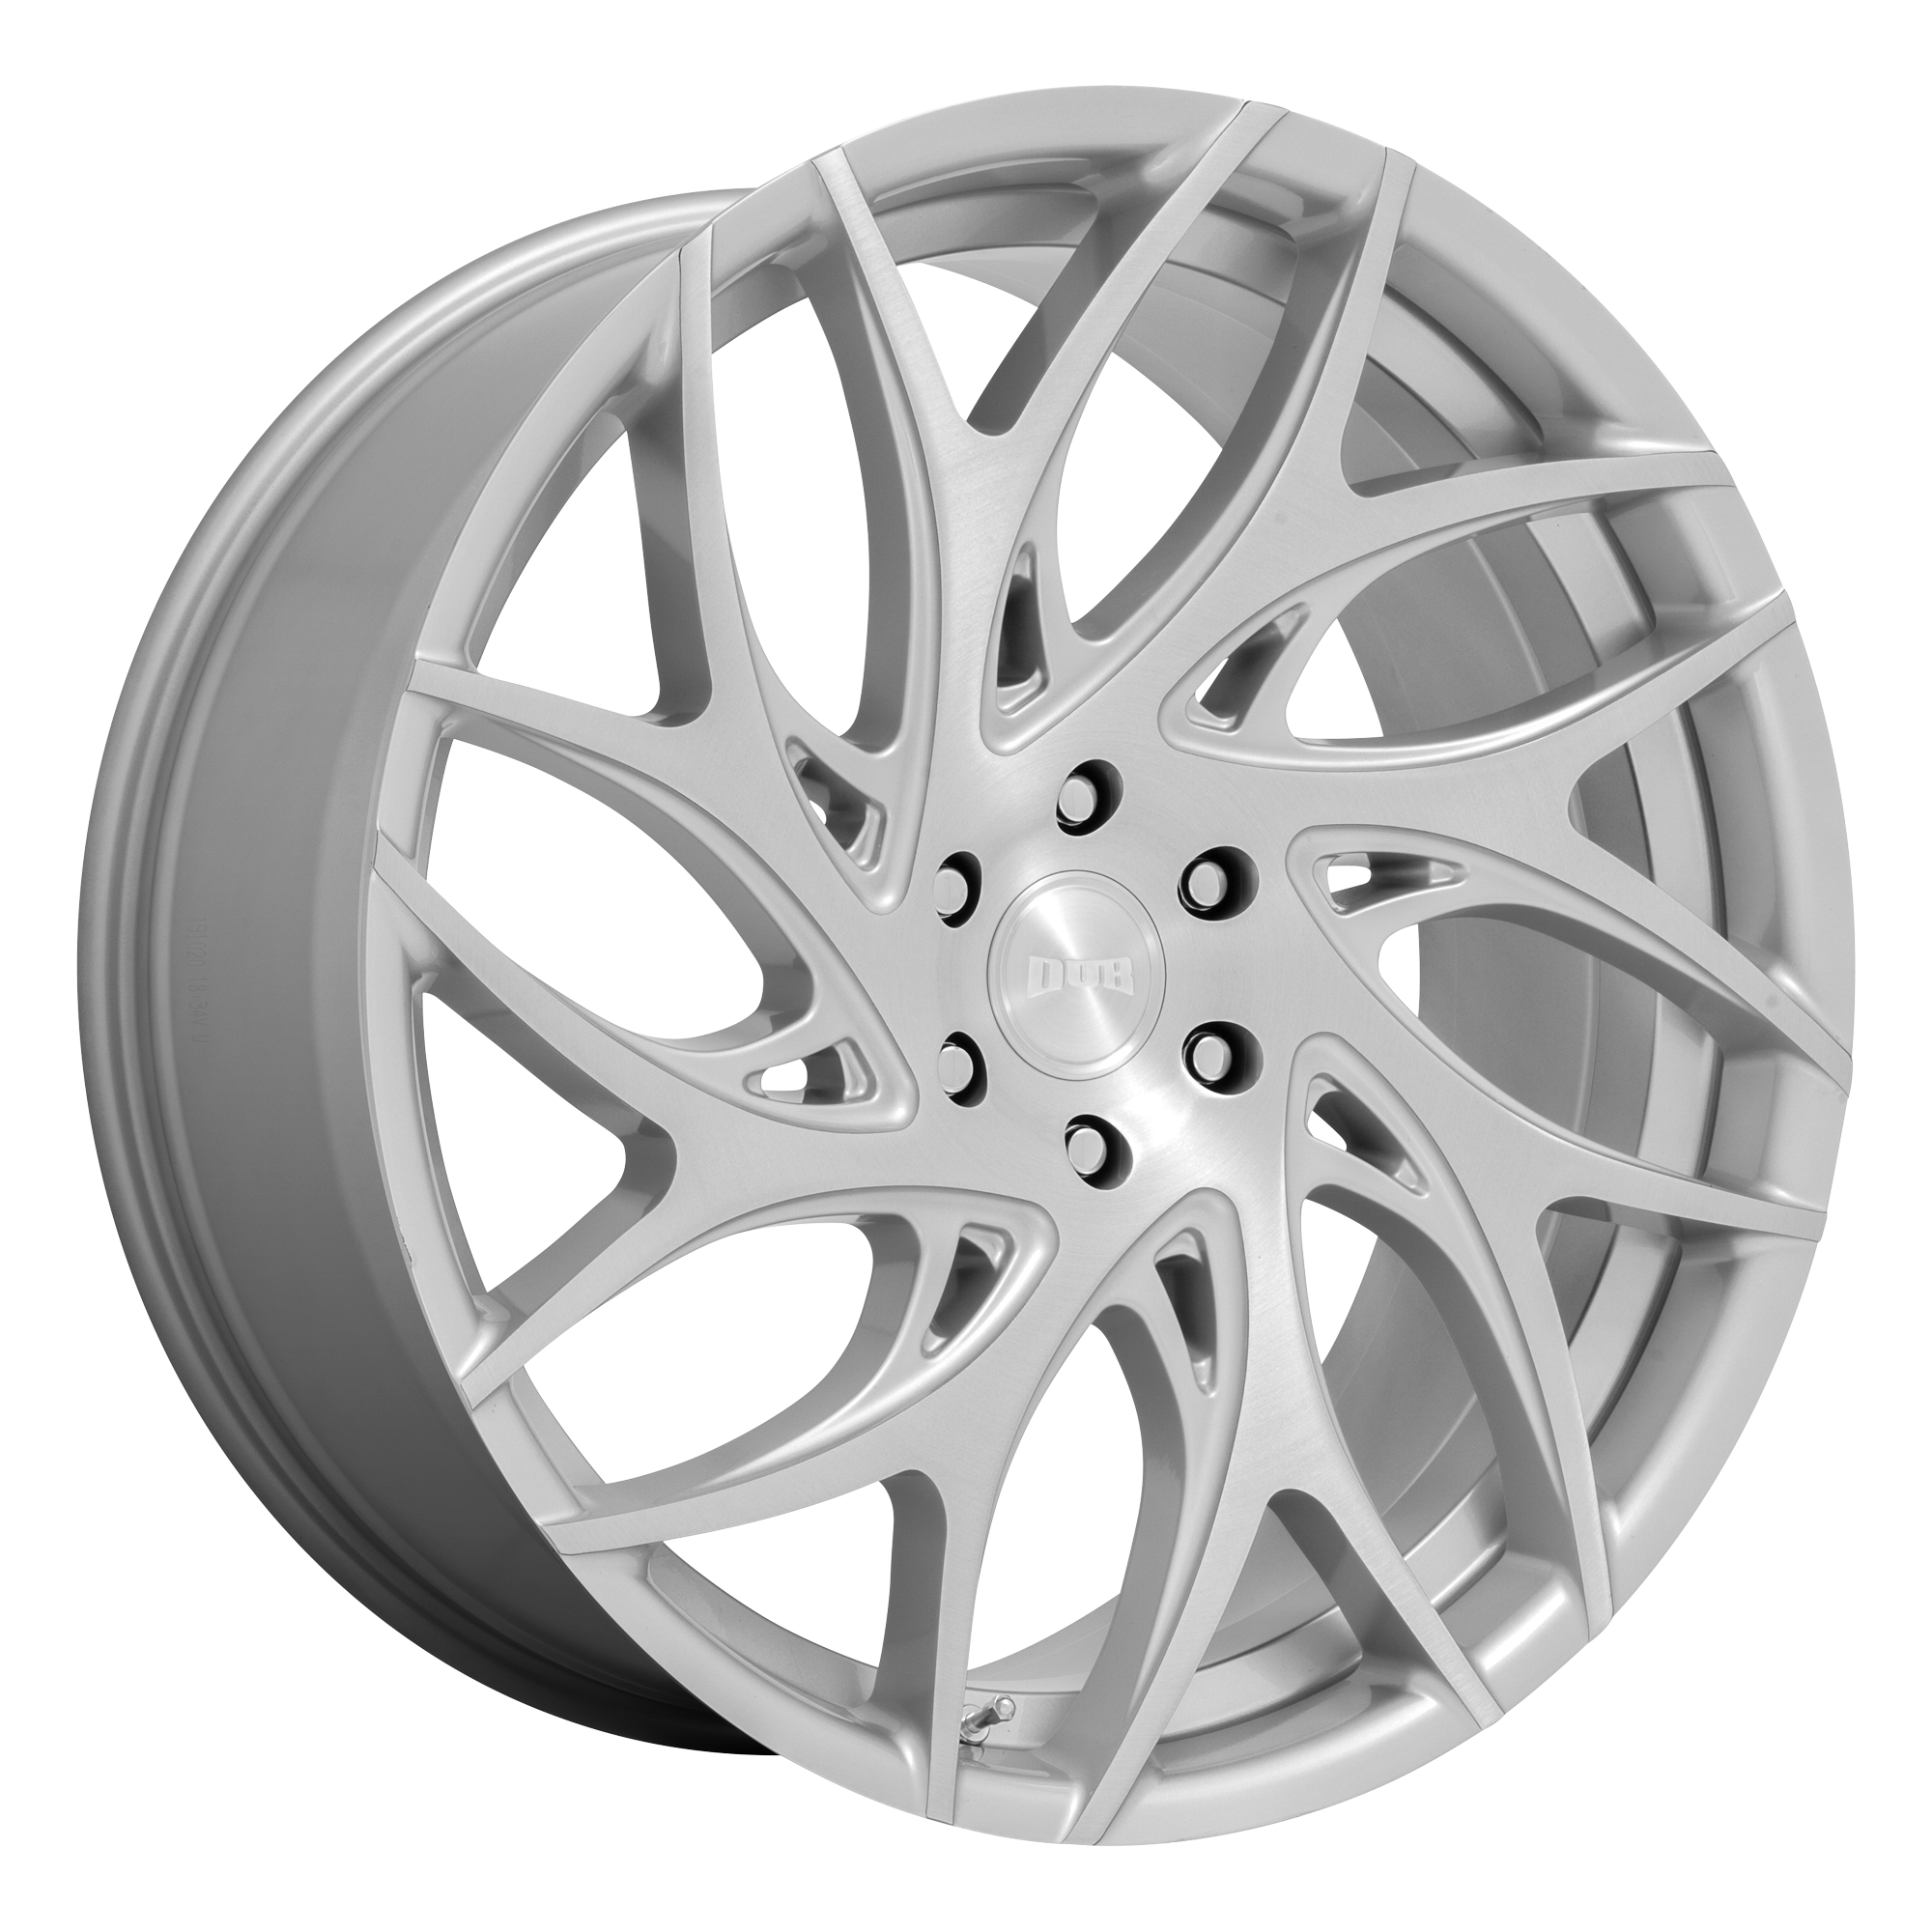 DUB 1PC S260 G.O.A.T. SILVER BRUSHED FACE WHEELS | 22X9 | 5X114.3 | OFFSET: 35MM | CB: 72.56MM